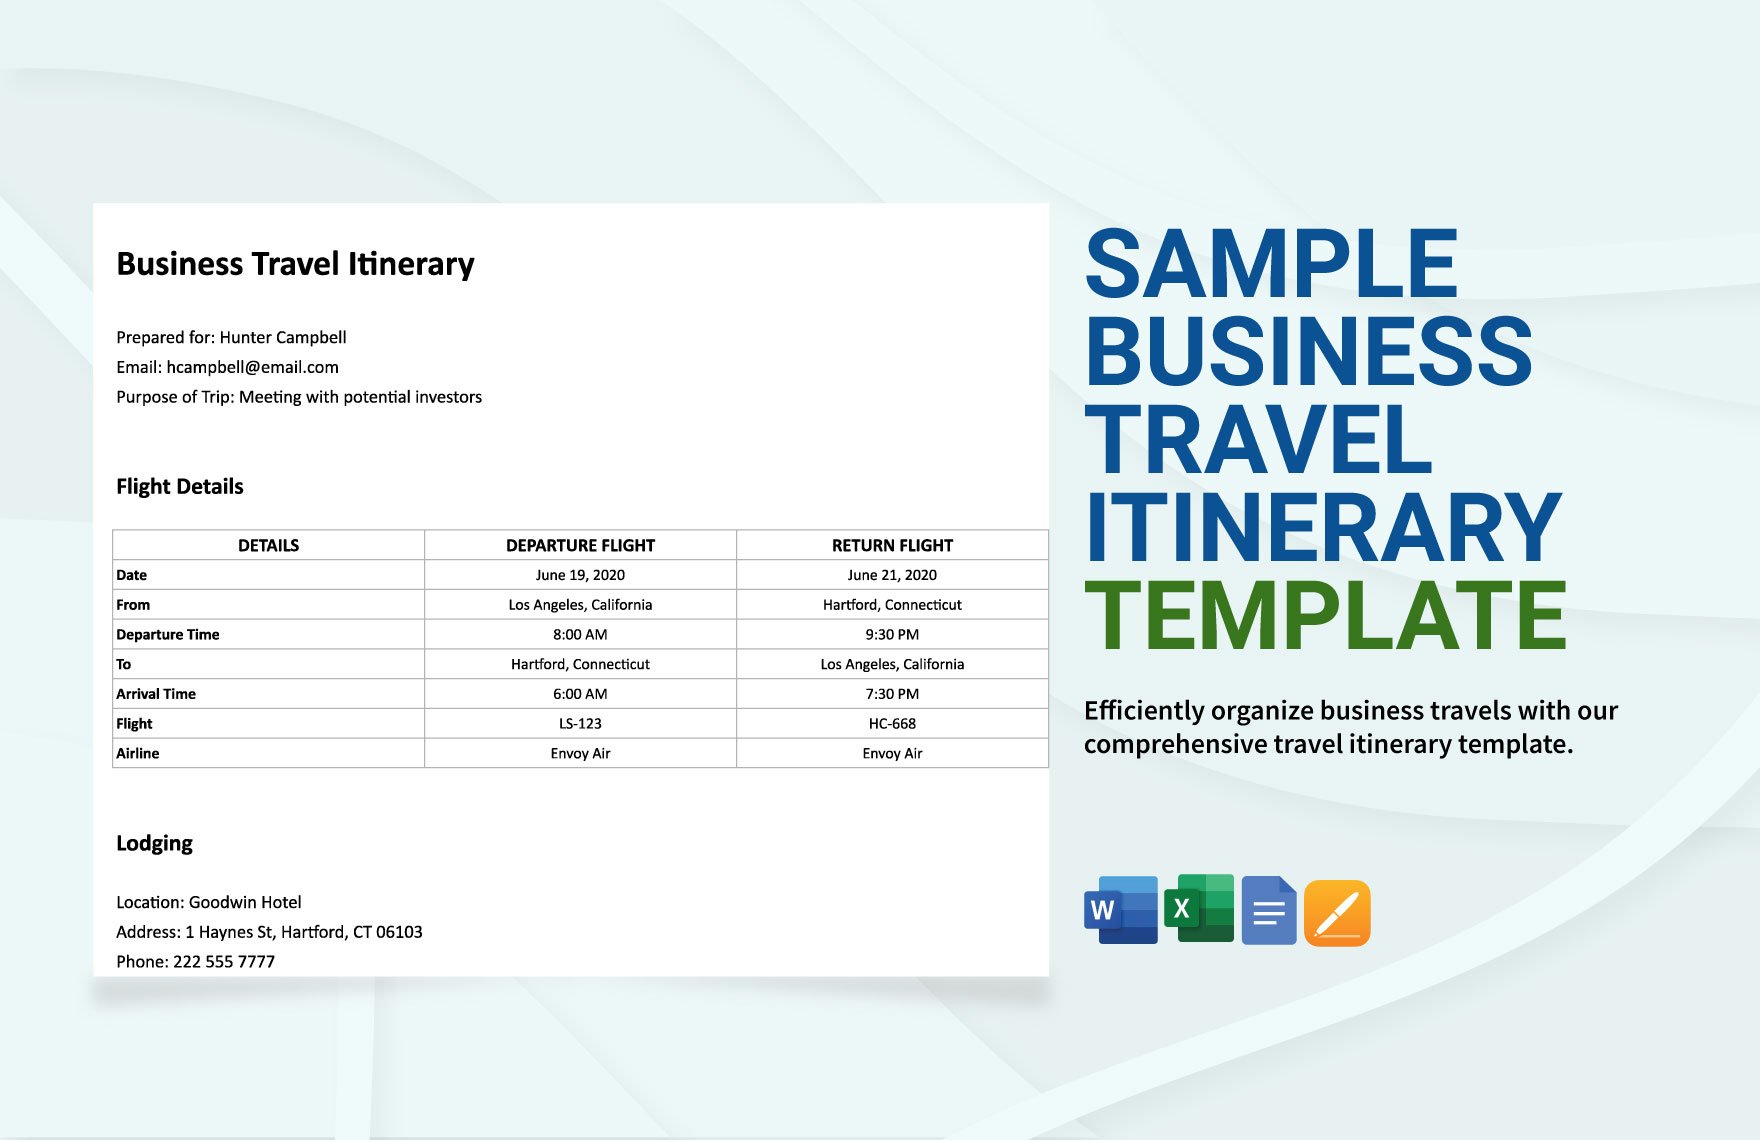 Free Sample Business Travel Itinerary Template in Word, Google Docs, Google Sheets, Apple Pages